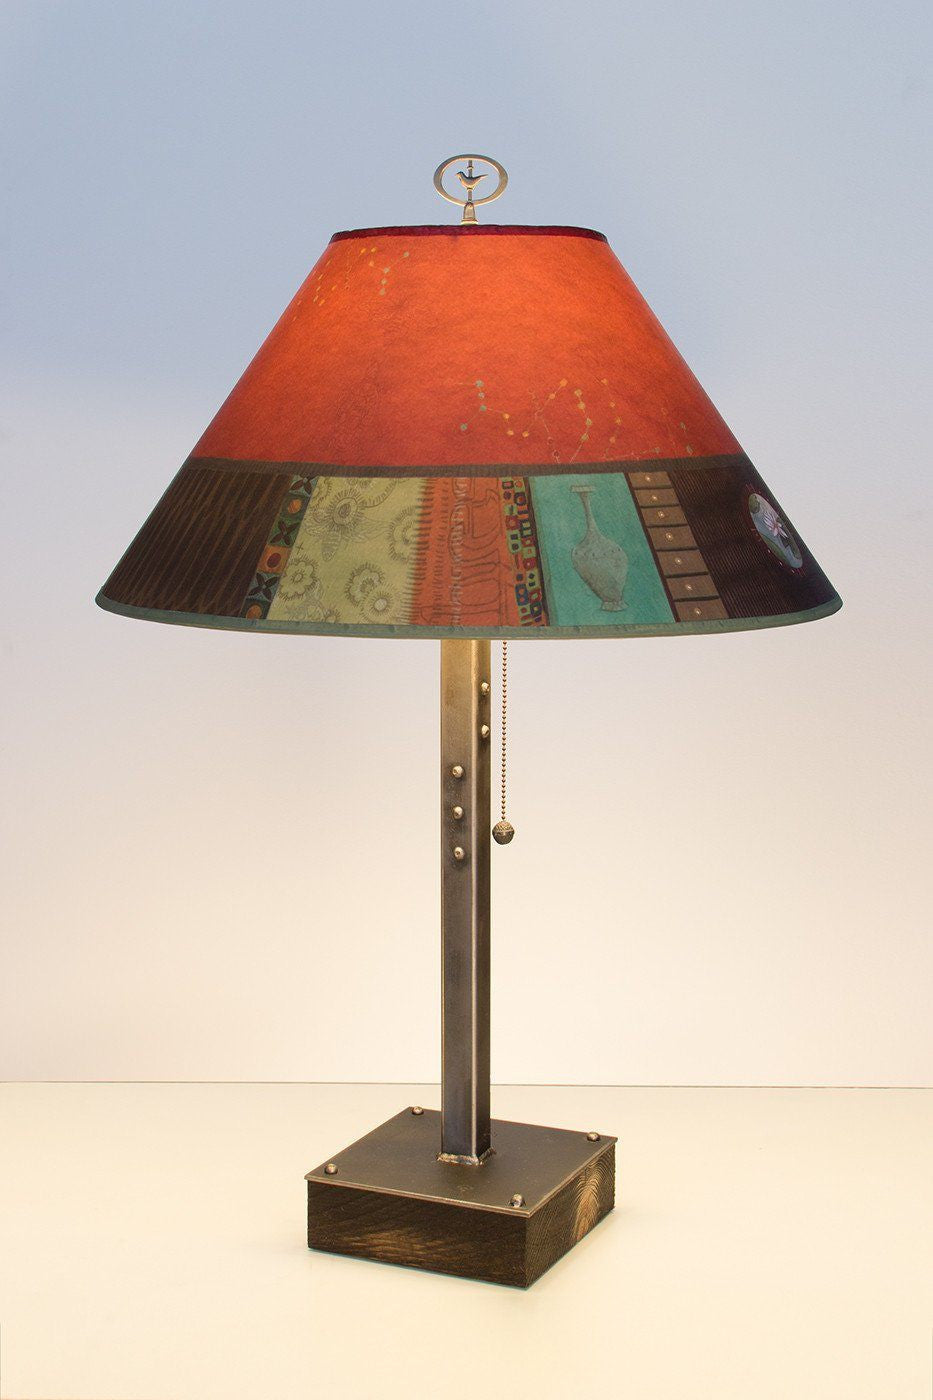 Steel Table Lamp on Wood with Large Conical Shade in Red Match